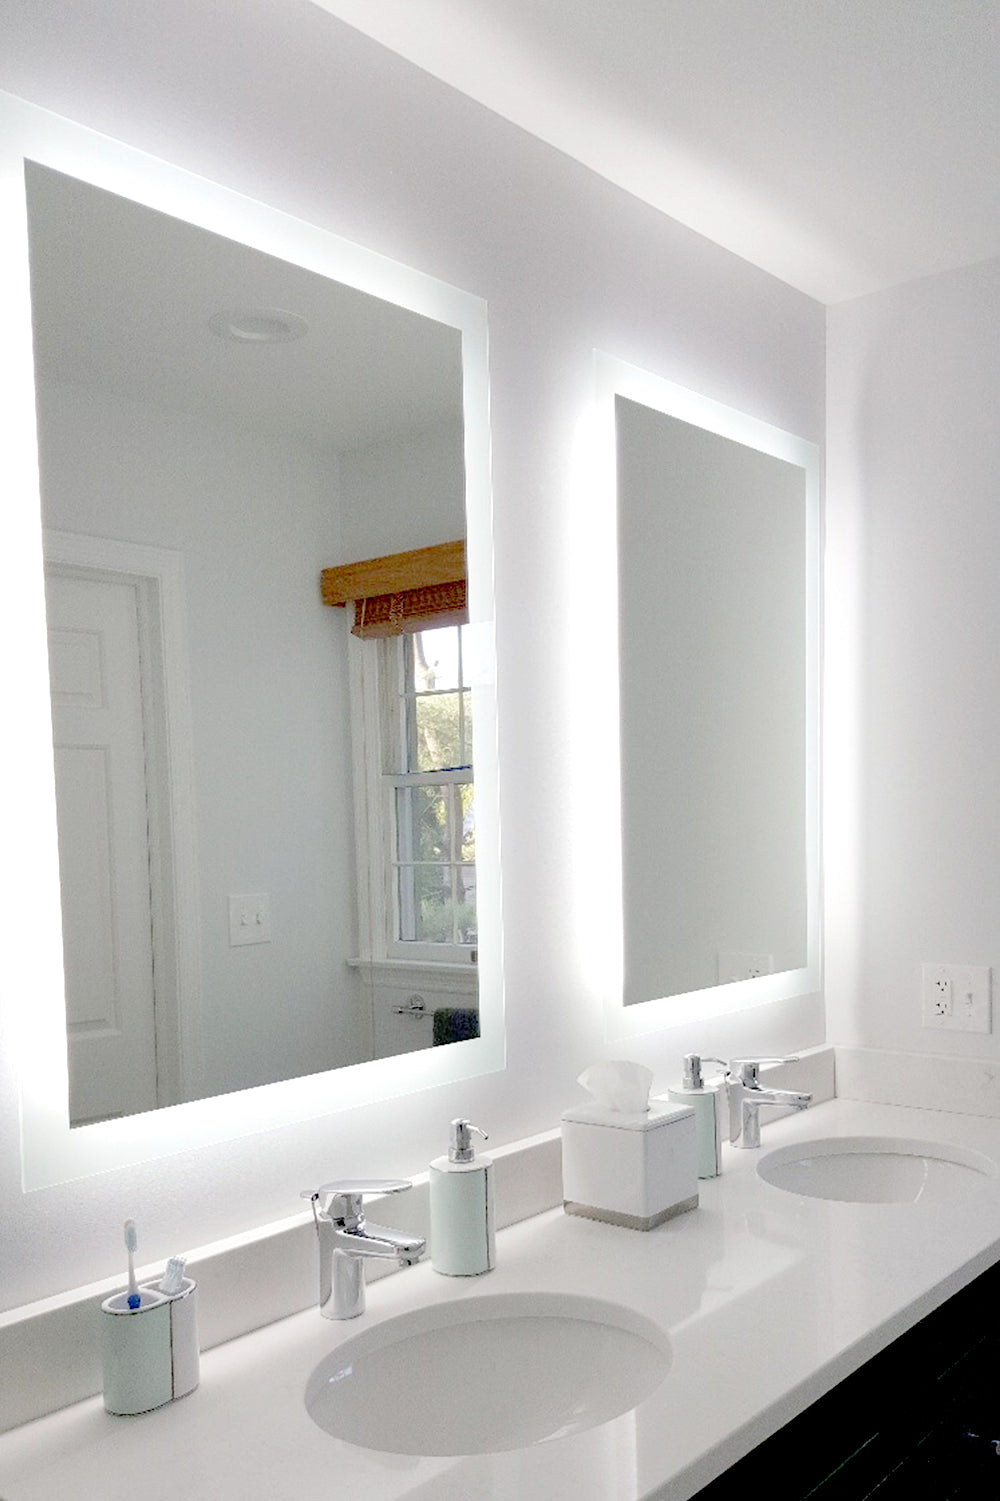 LED Mirror (Side-Lighted) 32" x 40" (or 40" x 32")